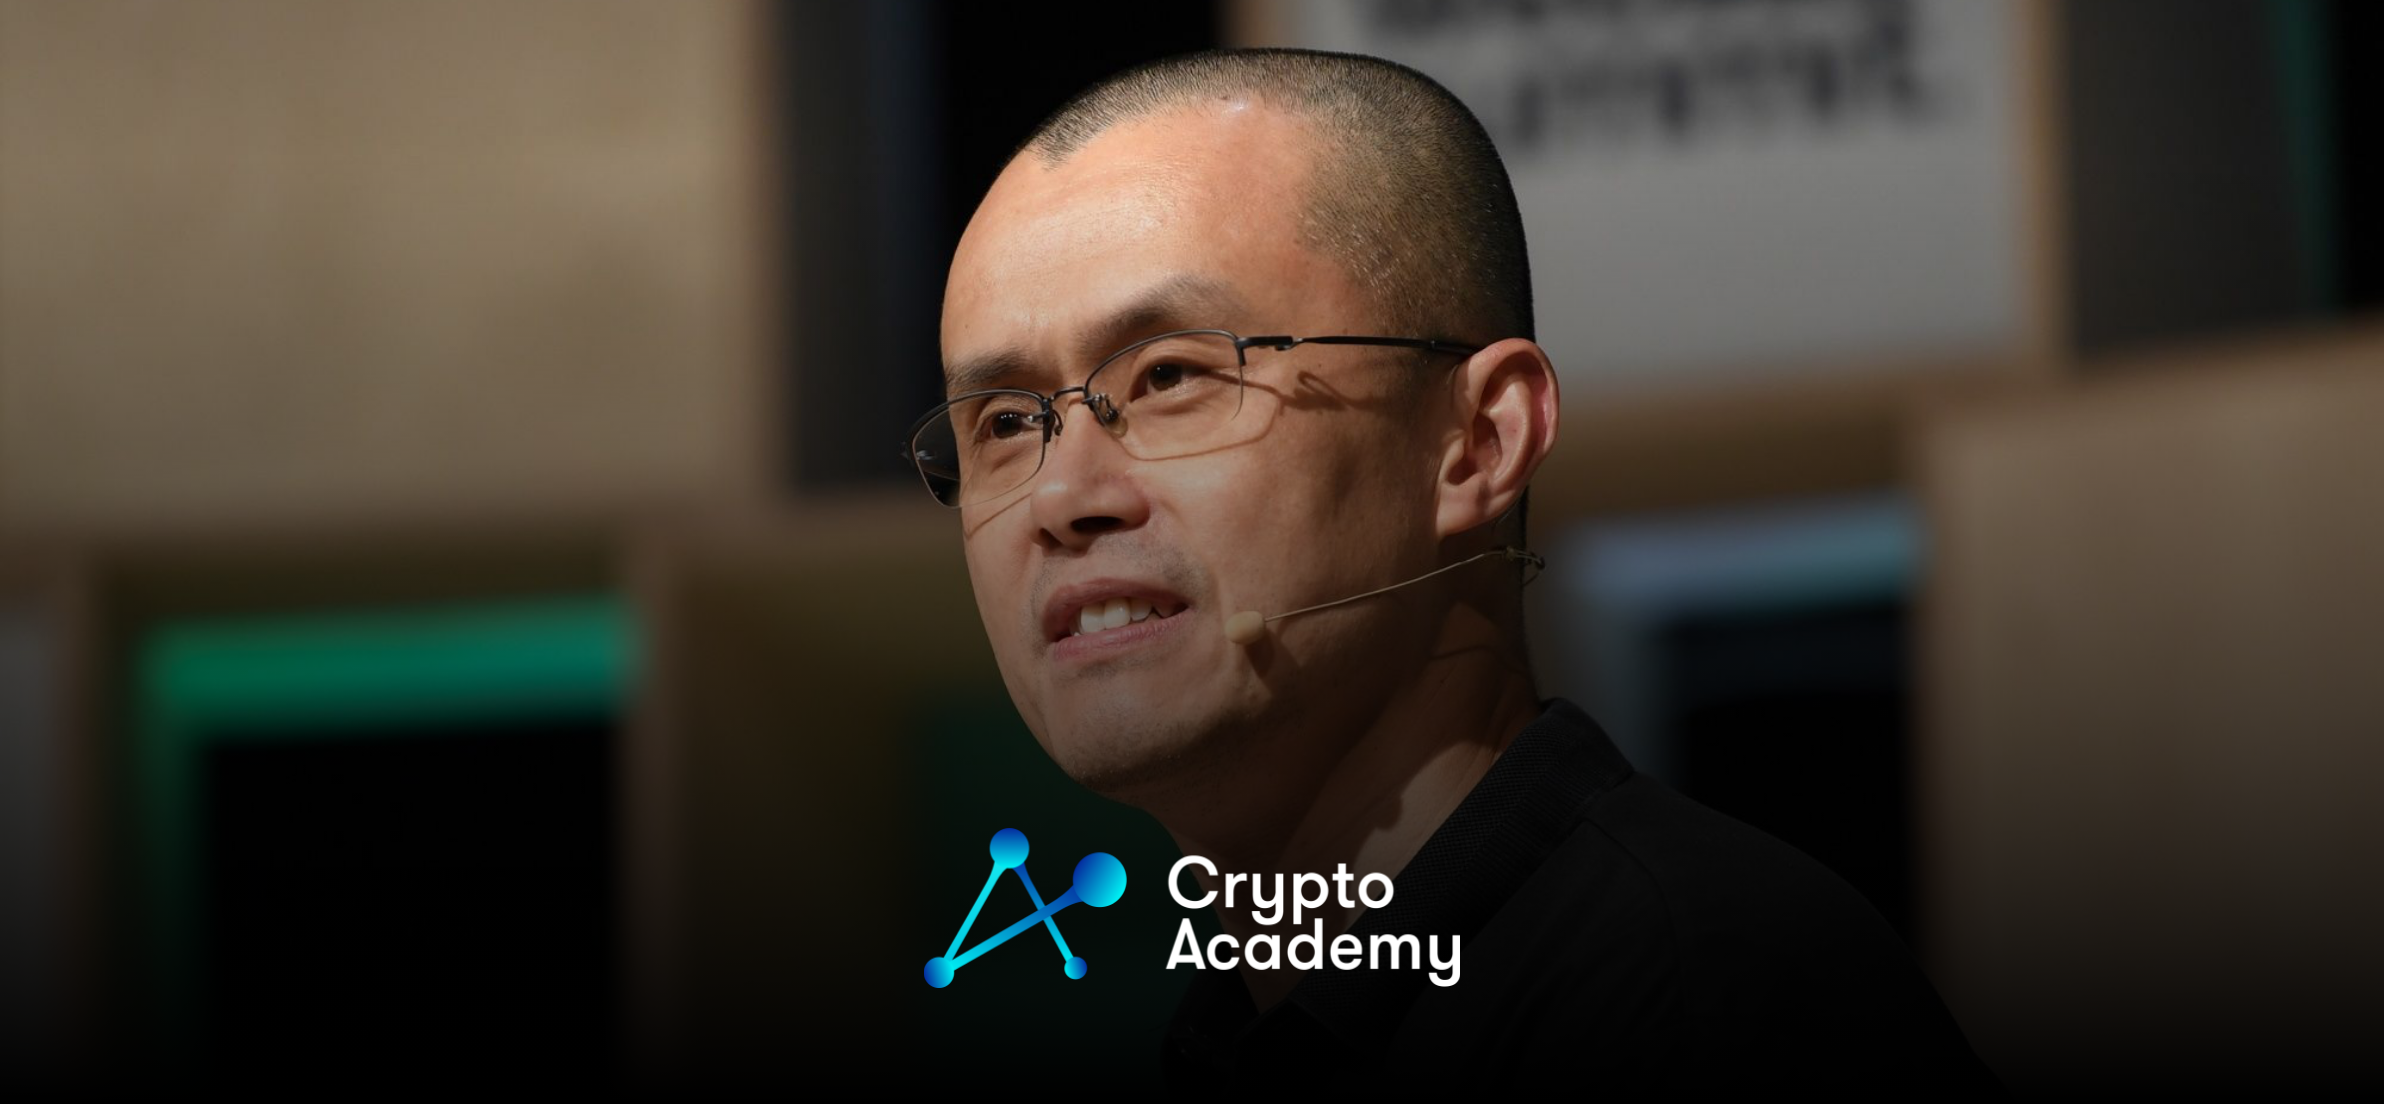 Binance CEO CZ Faces Legal Action Over Alleged Use of Twitter to ‘Hurt FTX’